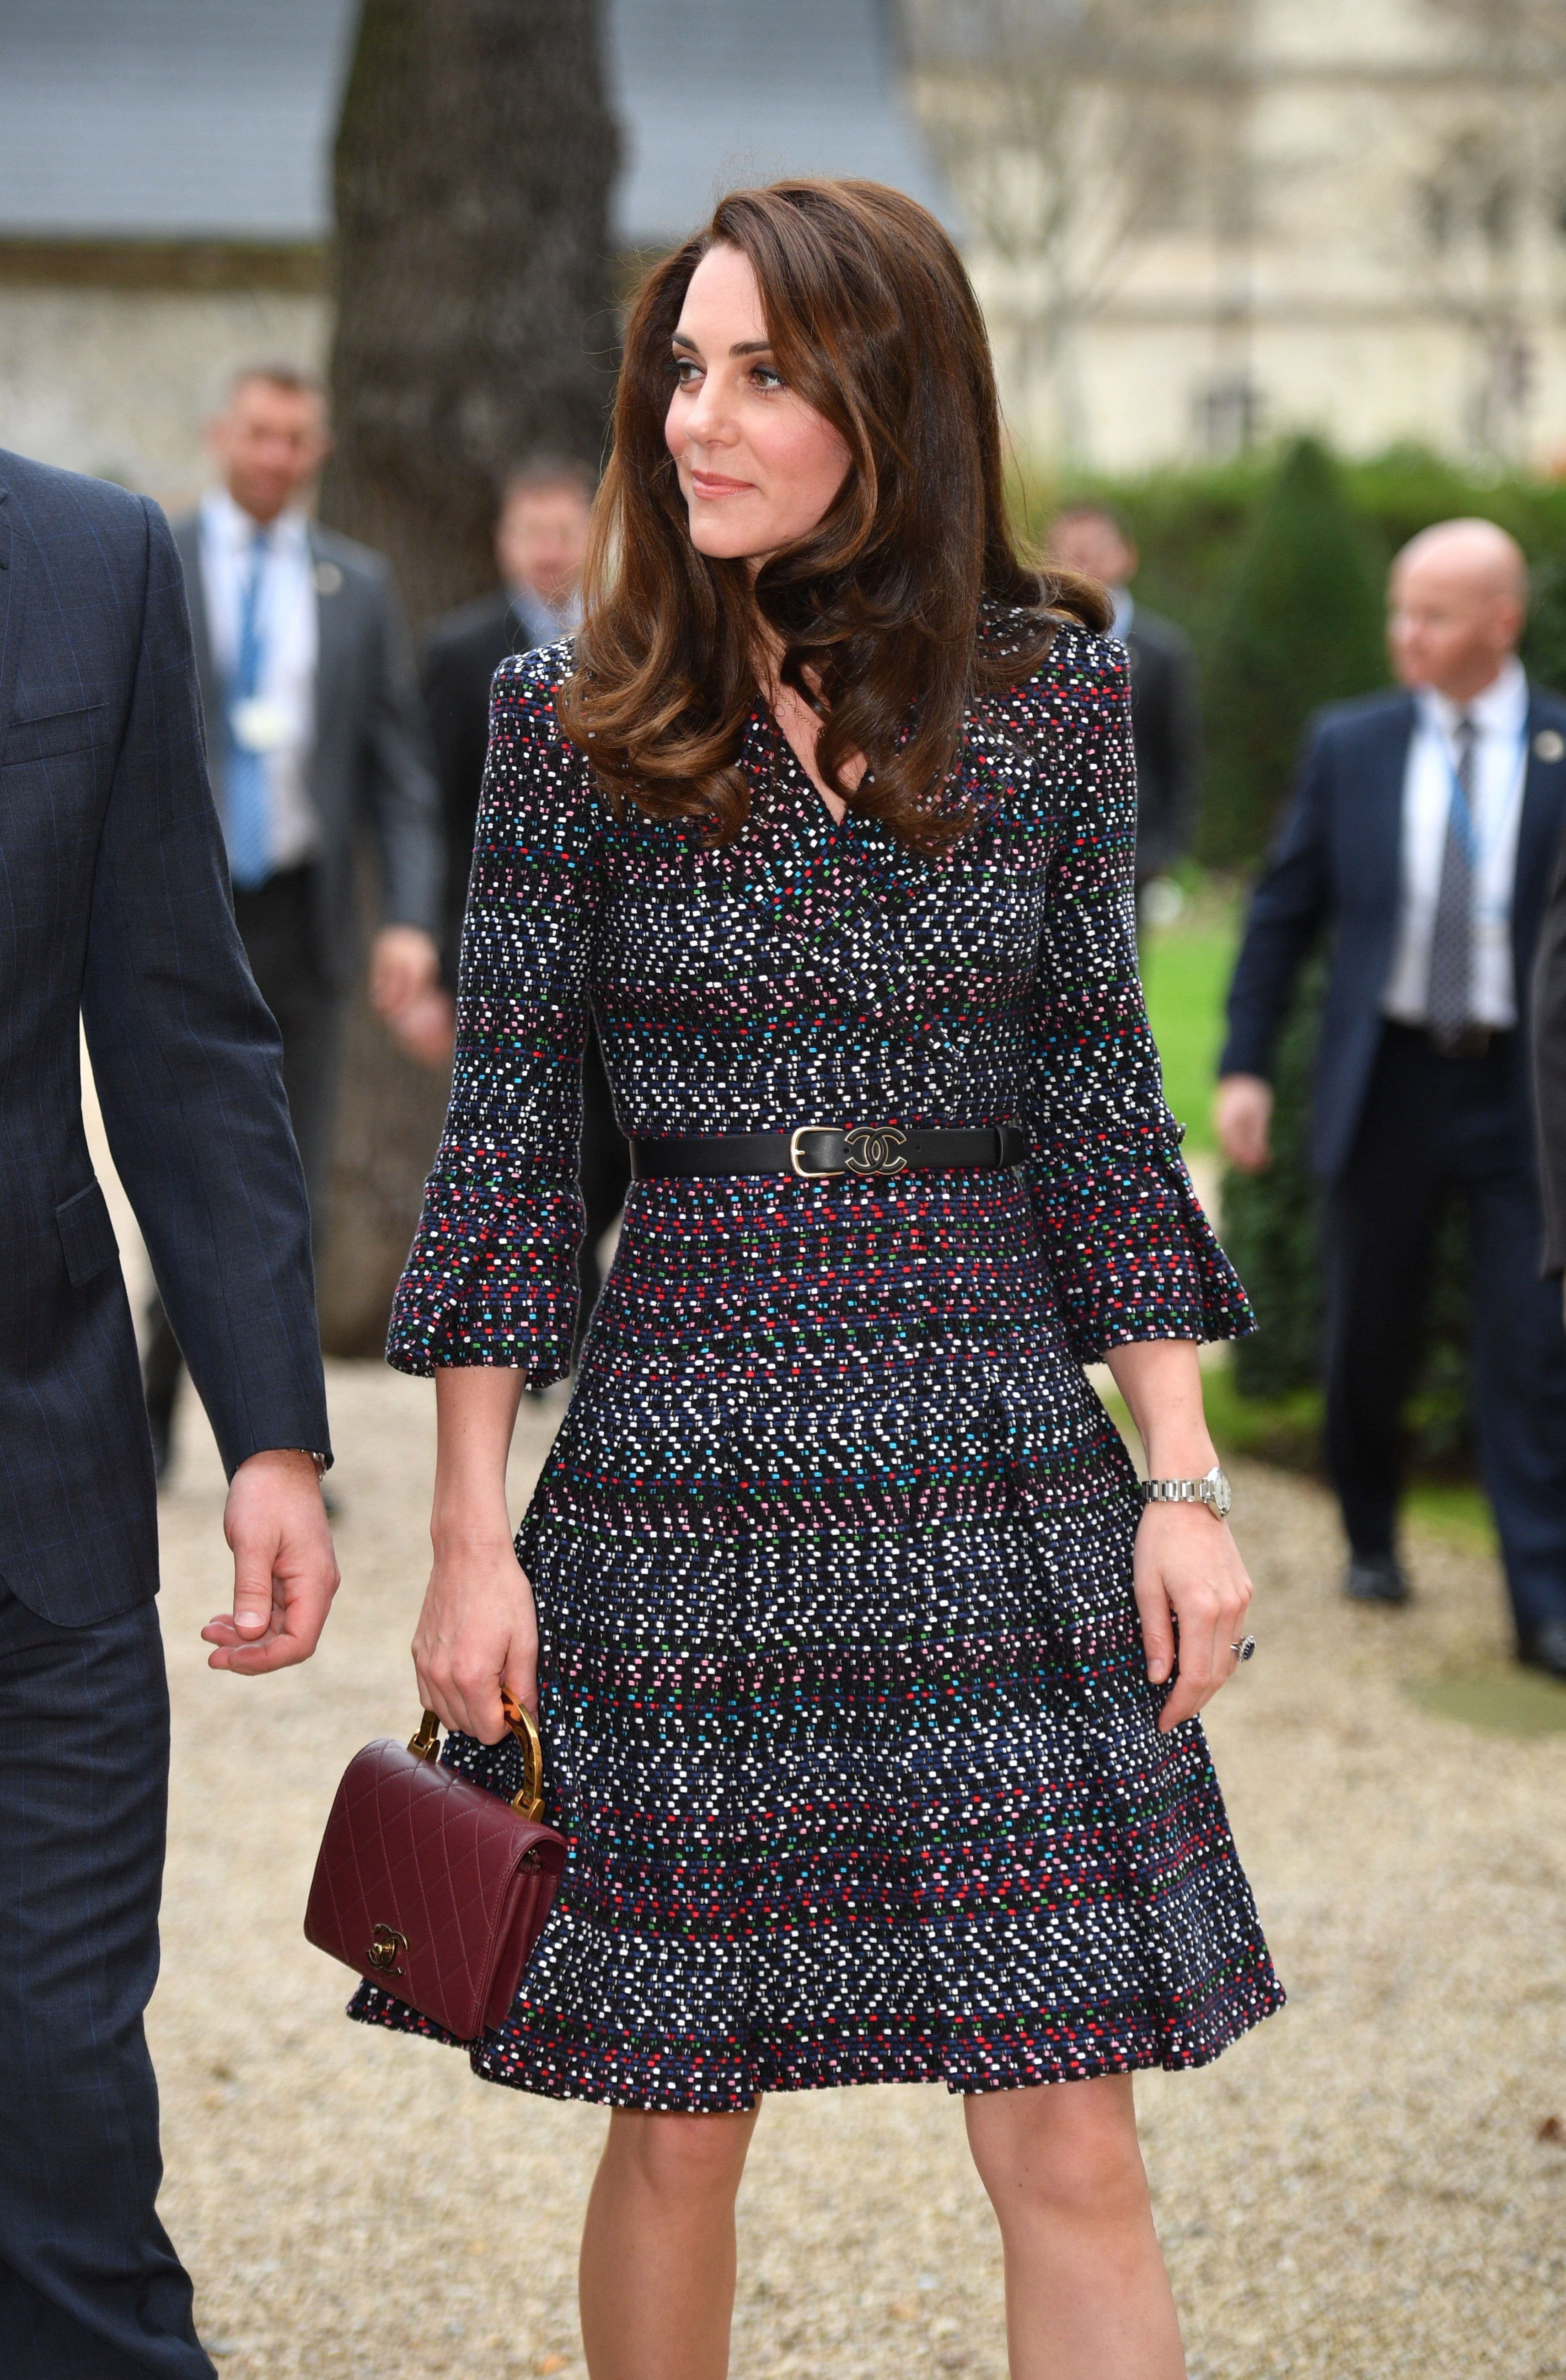 Kate Middleton's Chanel obsession continues during her Boston